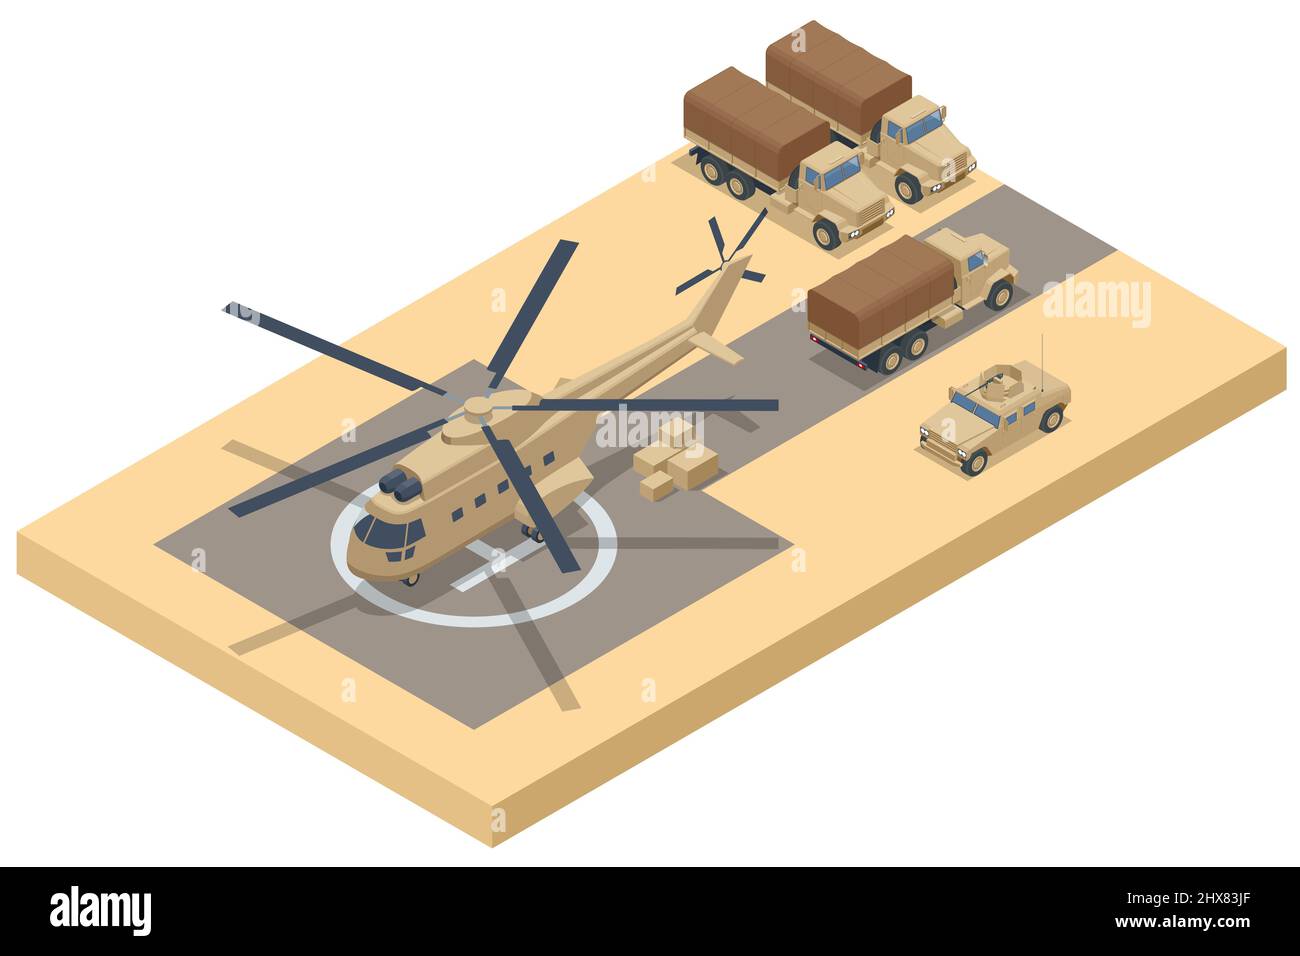 Isometric military helicopter on the runway and military trucks. Military Aviation Air Force Stock Vector